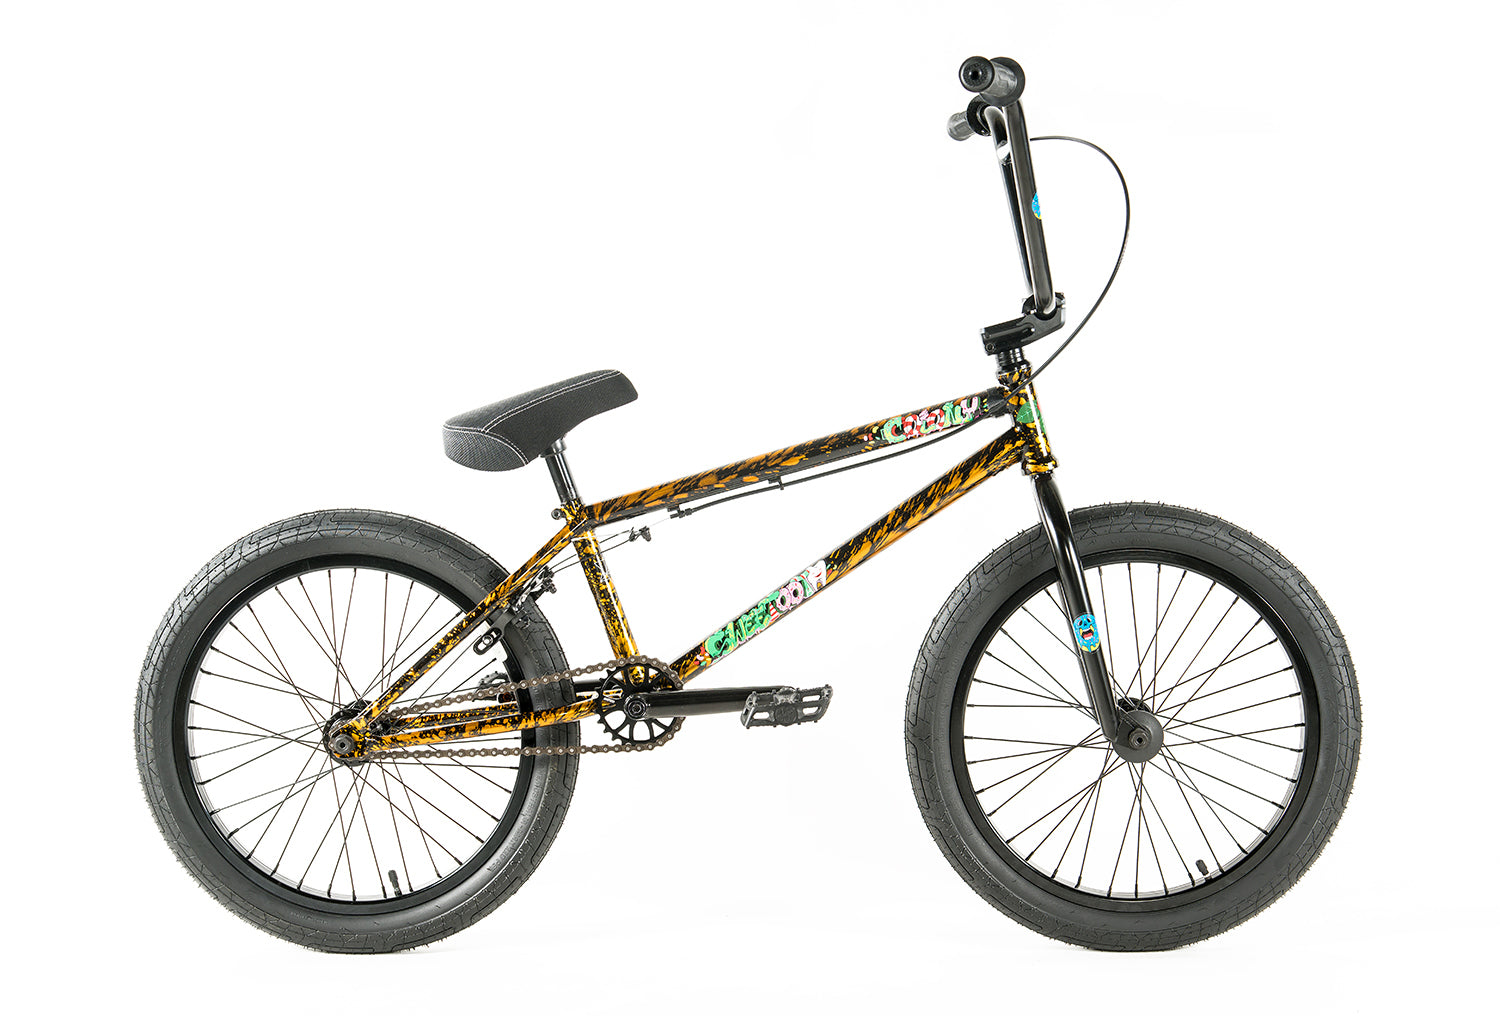 Colony Sweet Tooth Pro 20" Complete BMX Bike - Silver Storm - Side View